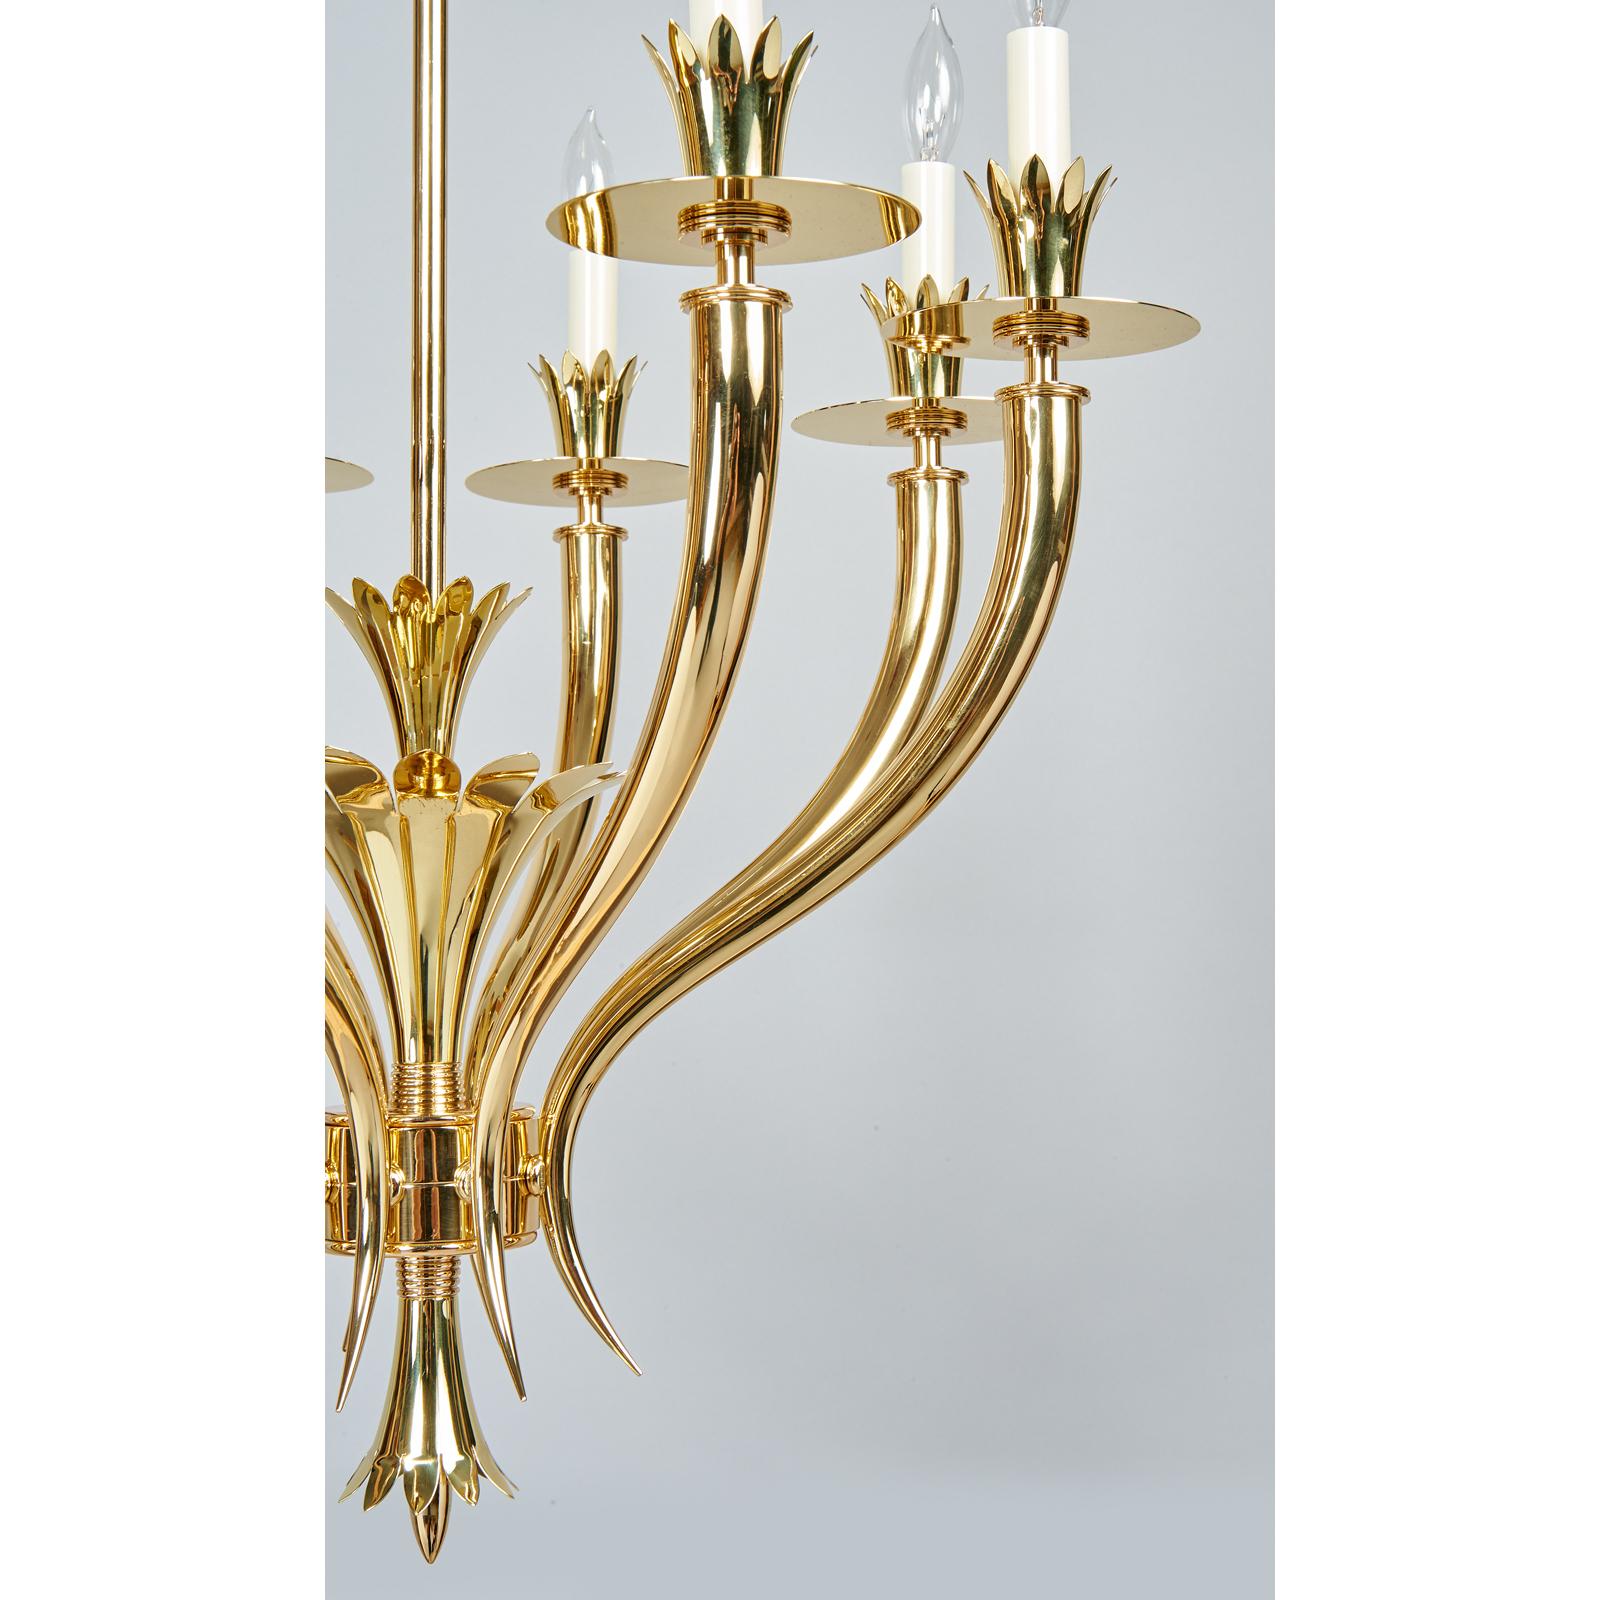 Gio Ponti: Important Geometric 8-Arm Chandelier in Polished Brass, Italy 1930s For Sale 4